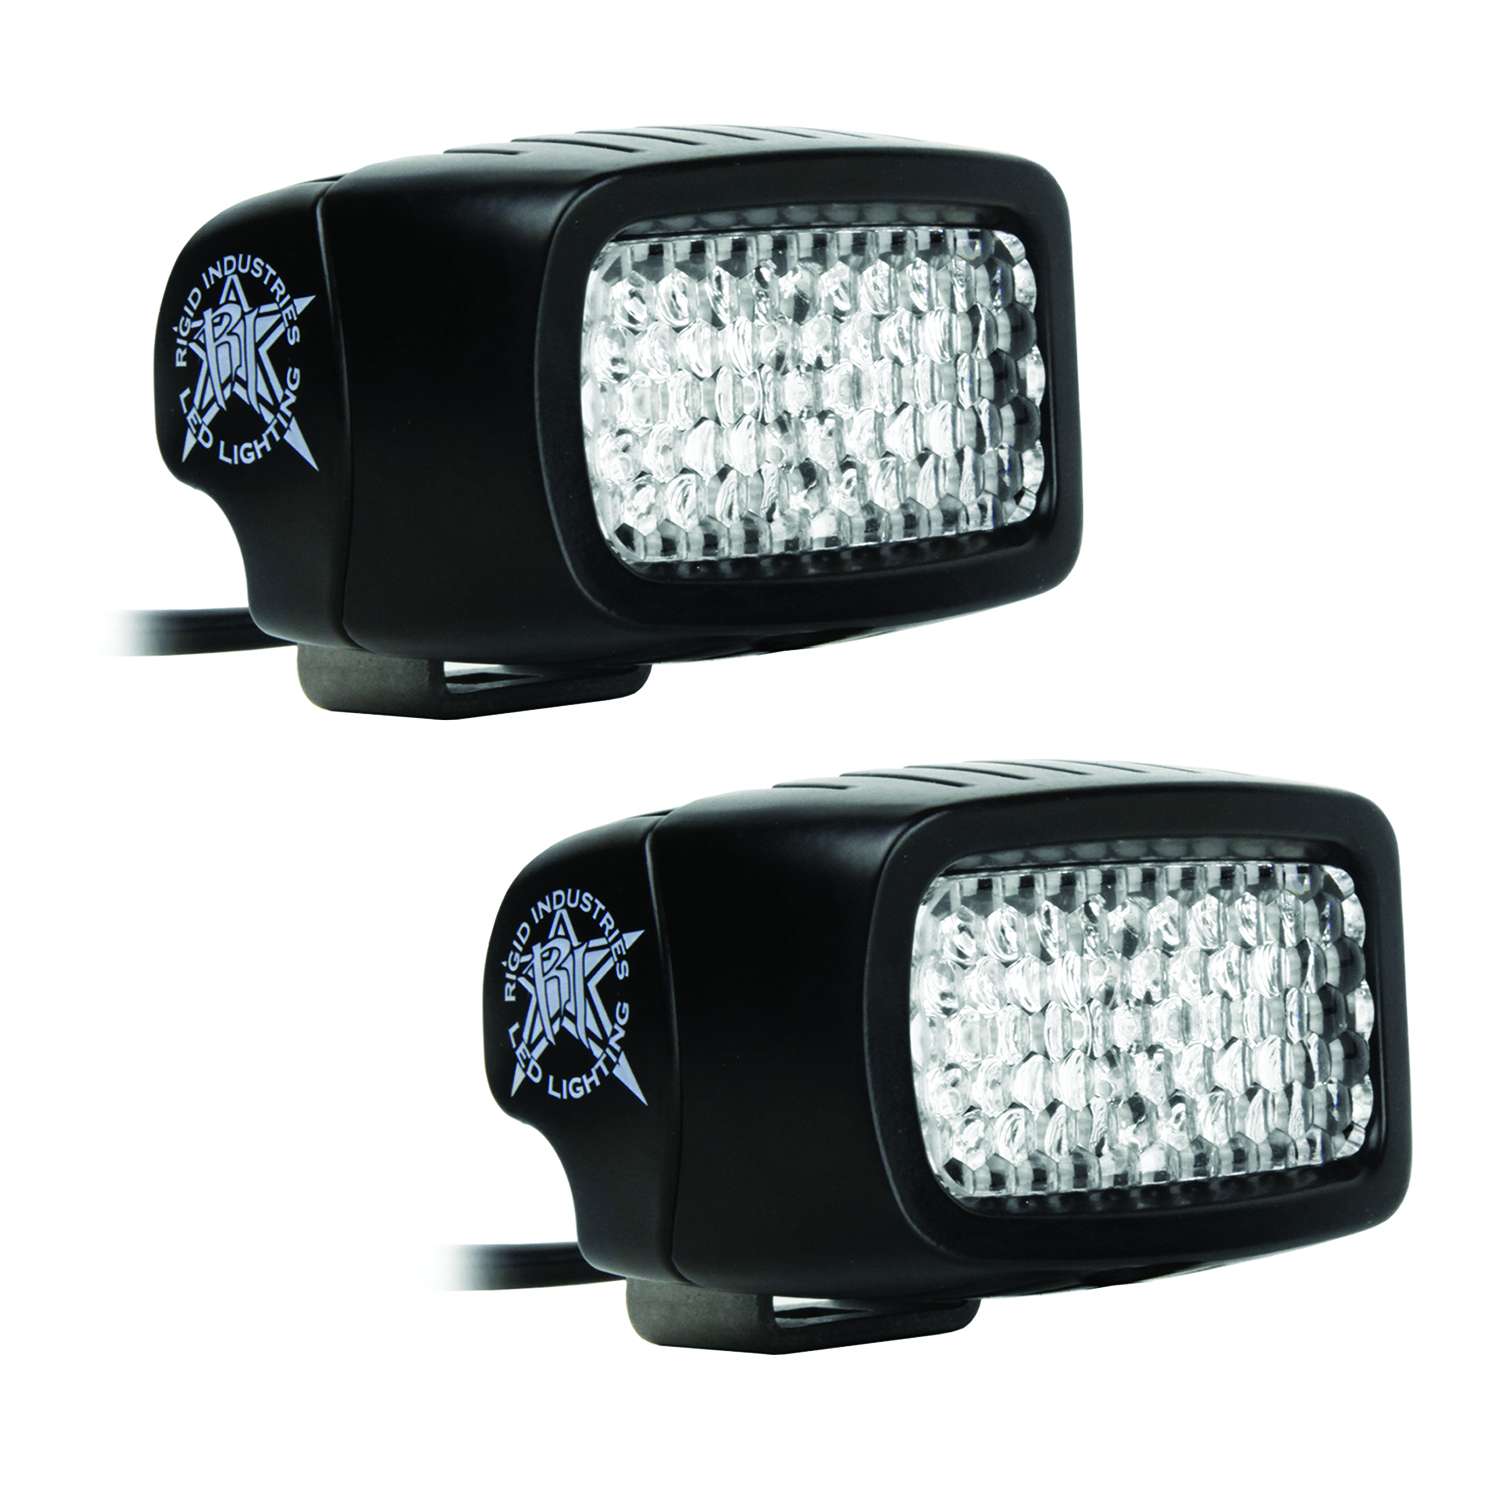 <p>Don't neglect the back of your ride. Rigid Industries' Back Up Light Kit makes hitching up at night worlds easier. They're a breeze to install, too.</p>
